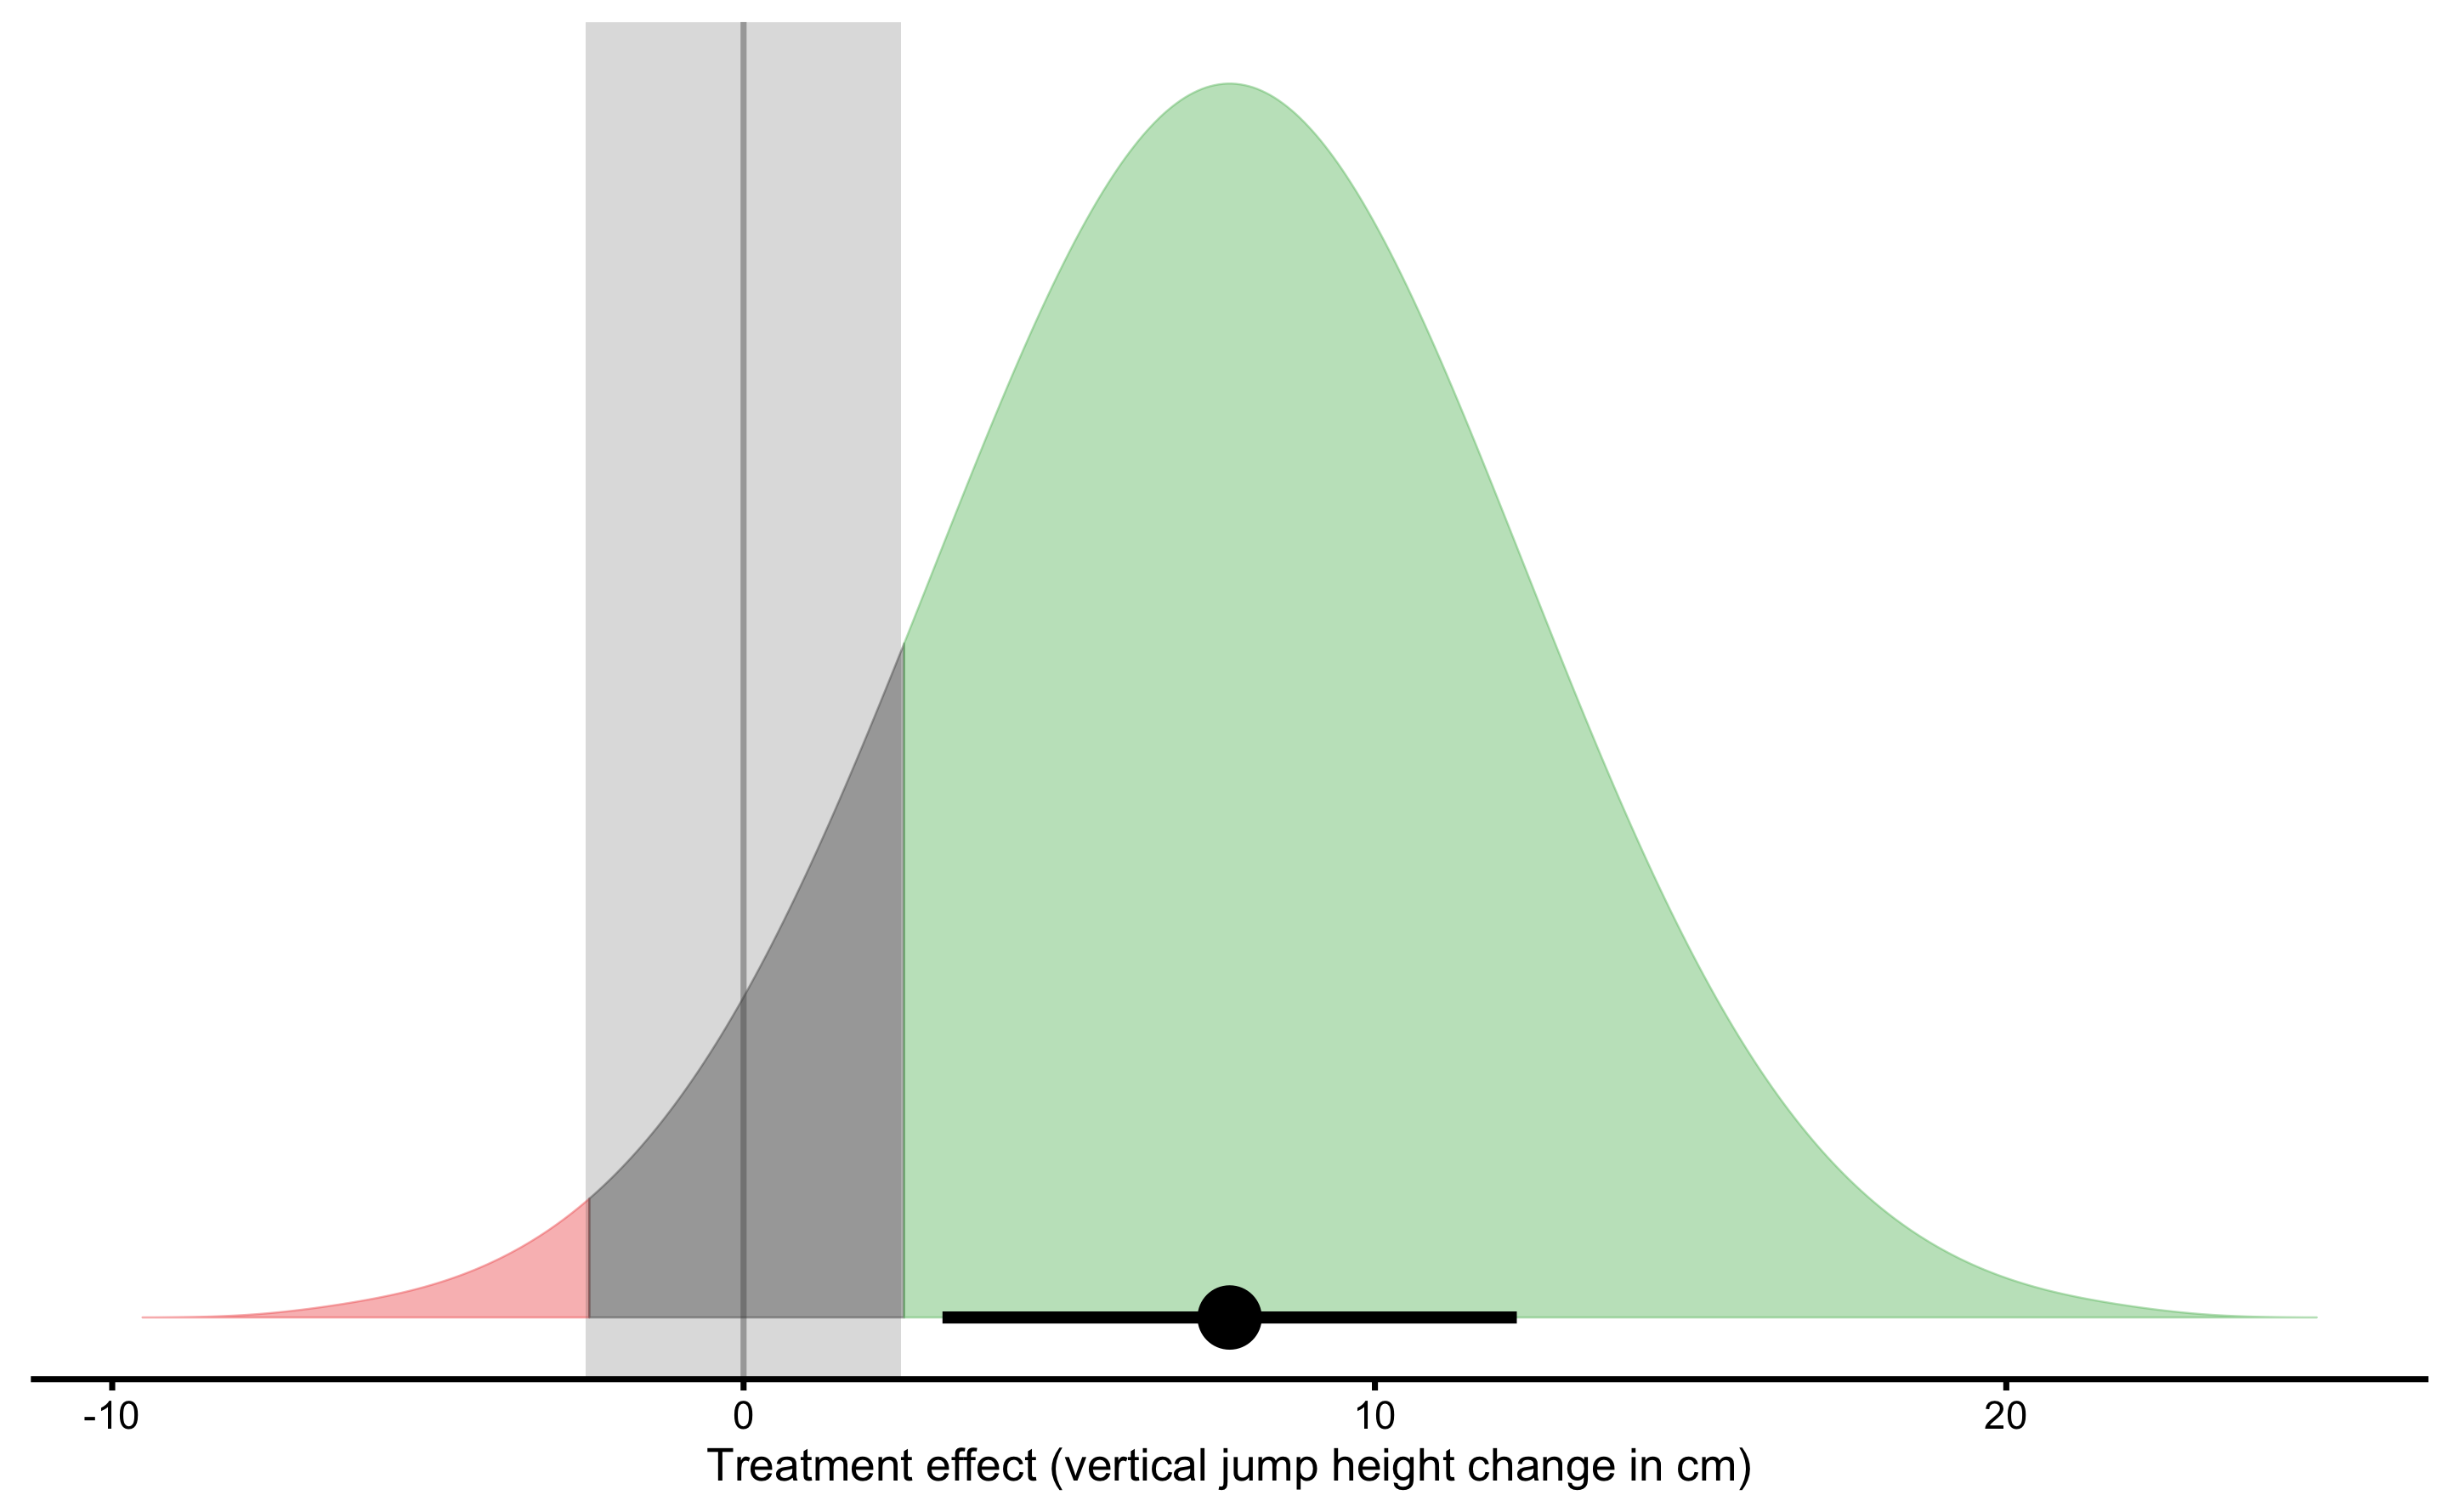 Graphical representation of the causal Treatment effect. Green area indicates proportion of higher than SESOI treatment effects, red indicates proportion of negative and lower than SESOI treatment effects, and grey indicates treatment effects that are within SESOI. Mean of treatment effect distribution represents average (or expected) causal effect or systematic treatment effect. SD of treatment effect distribution represents random systematic effect or \(SD_{TE}\)